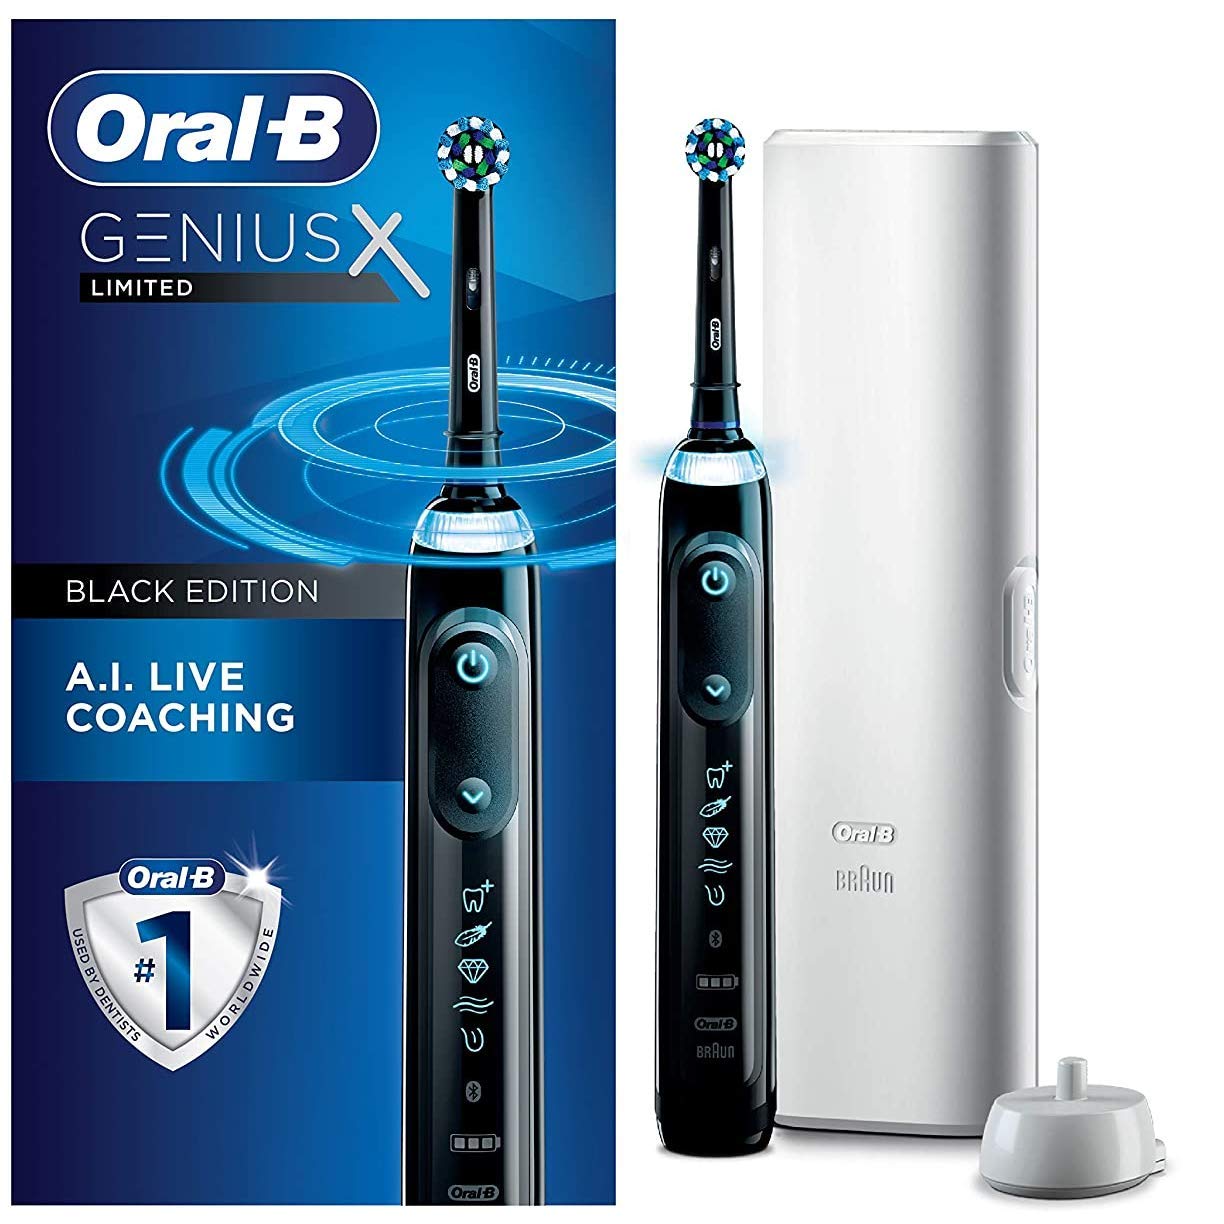 Oral-B Genius X Limited Electric Toothbrush w/ 3 Brush Heads (Various Colors) $100 + Free Shipping